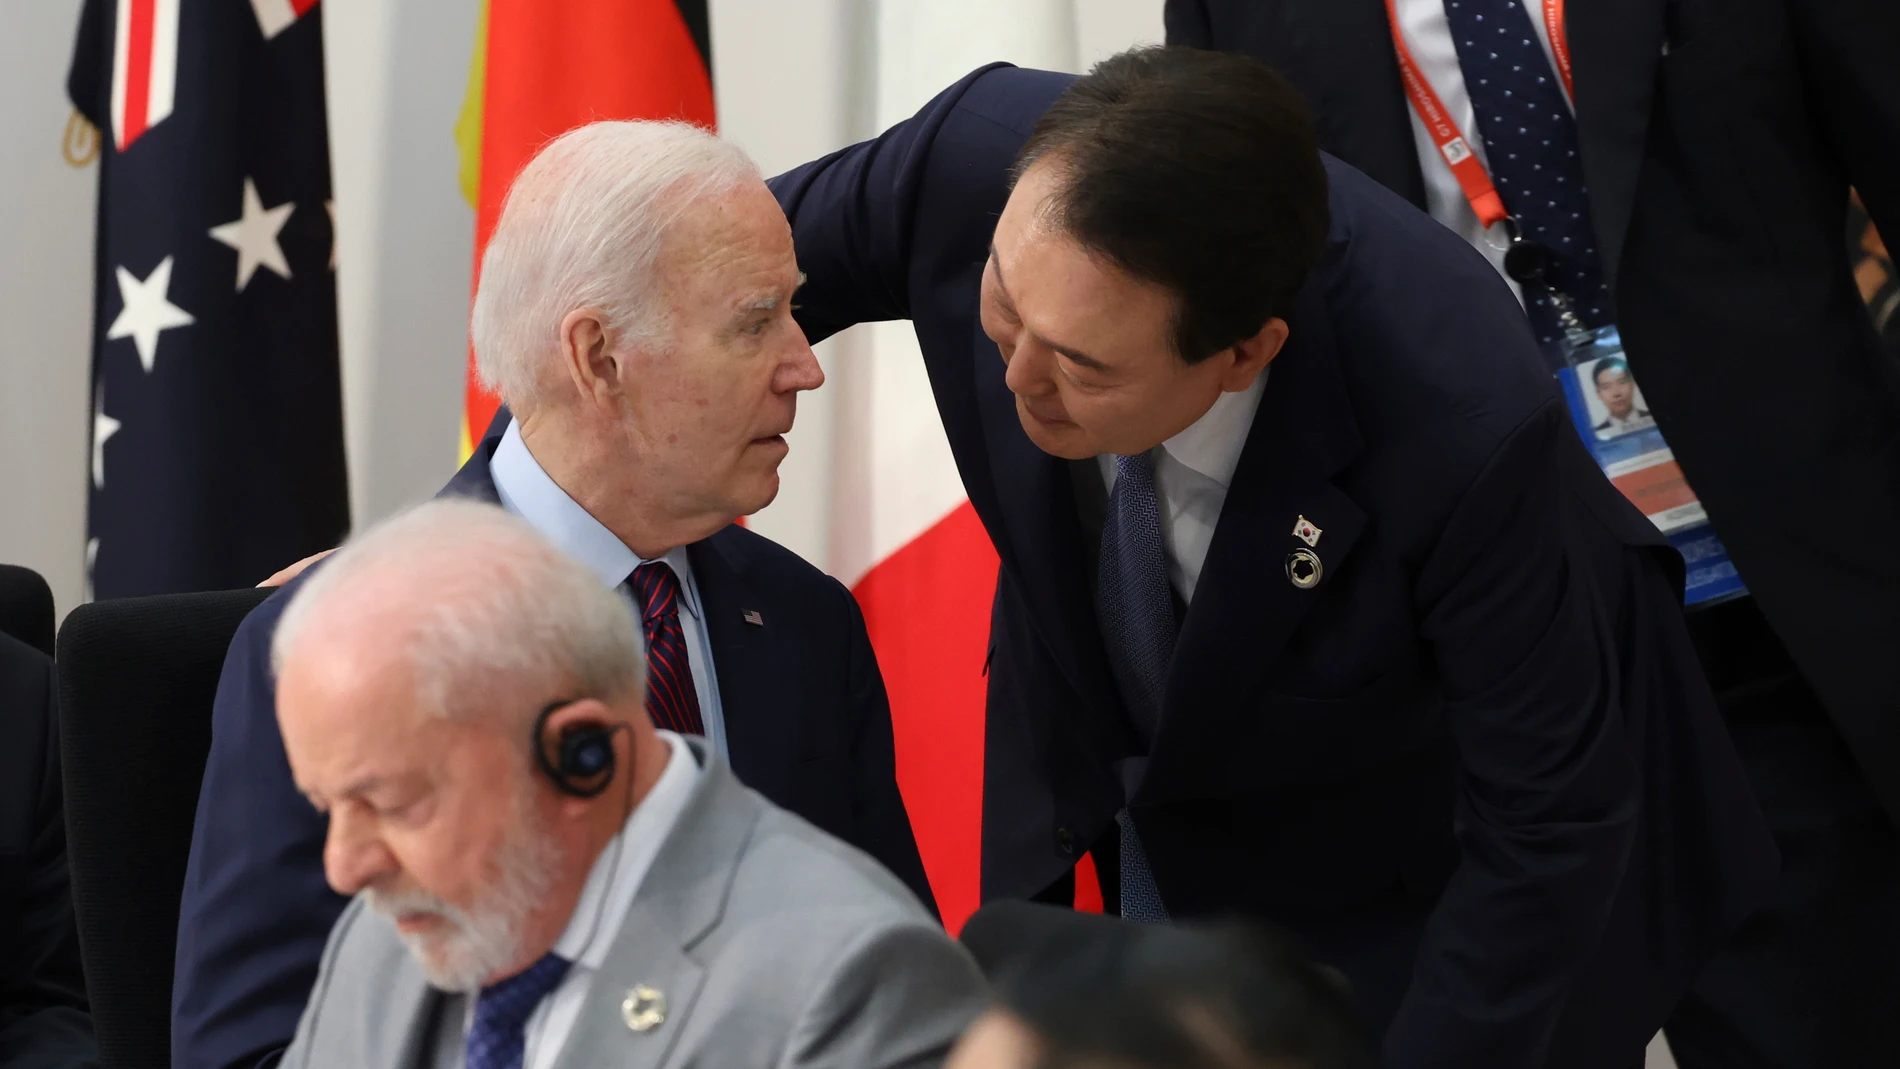 Hiroshima (Japan), 21/05/2023.- U.S. President Joe Biden (back left) and South Korean President Yoon Suk Yeol have a talk before a session during the G7 Hiroshima Summit in Hiroshima, Japan, 21 May 2023. The G7 Hiroshima Summit began 19 May and will conclude 21 May. (Japón, Corea del Sur, Ucrania) EFE/EPA/JAPAN POOL JAPAN OUT EDITORIAL USE ONLY/ 